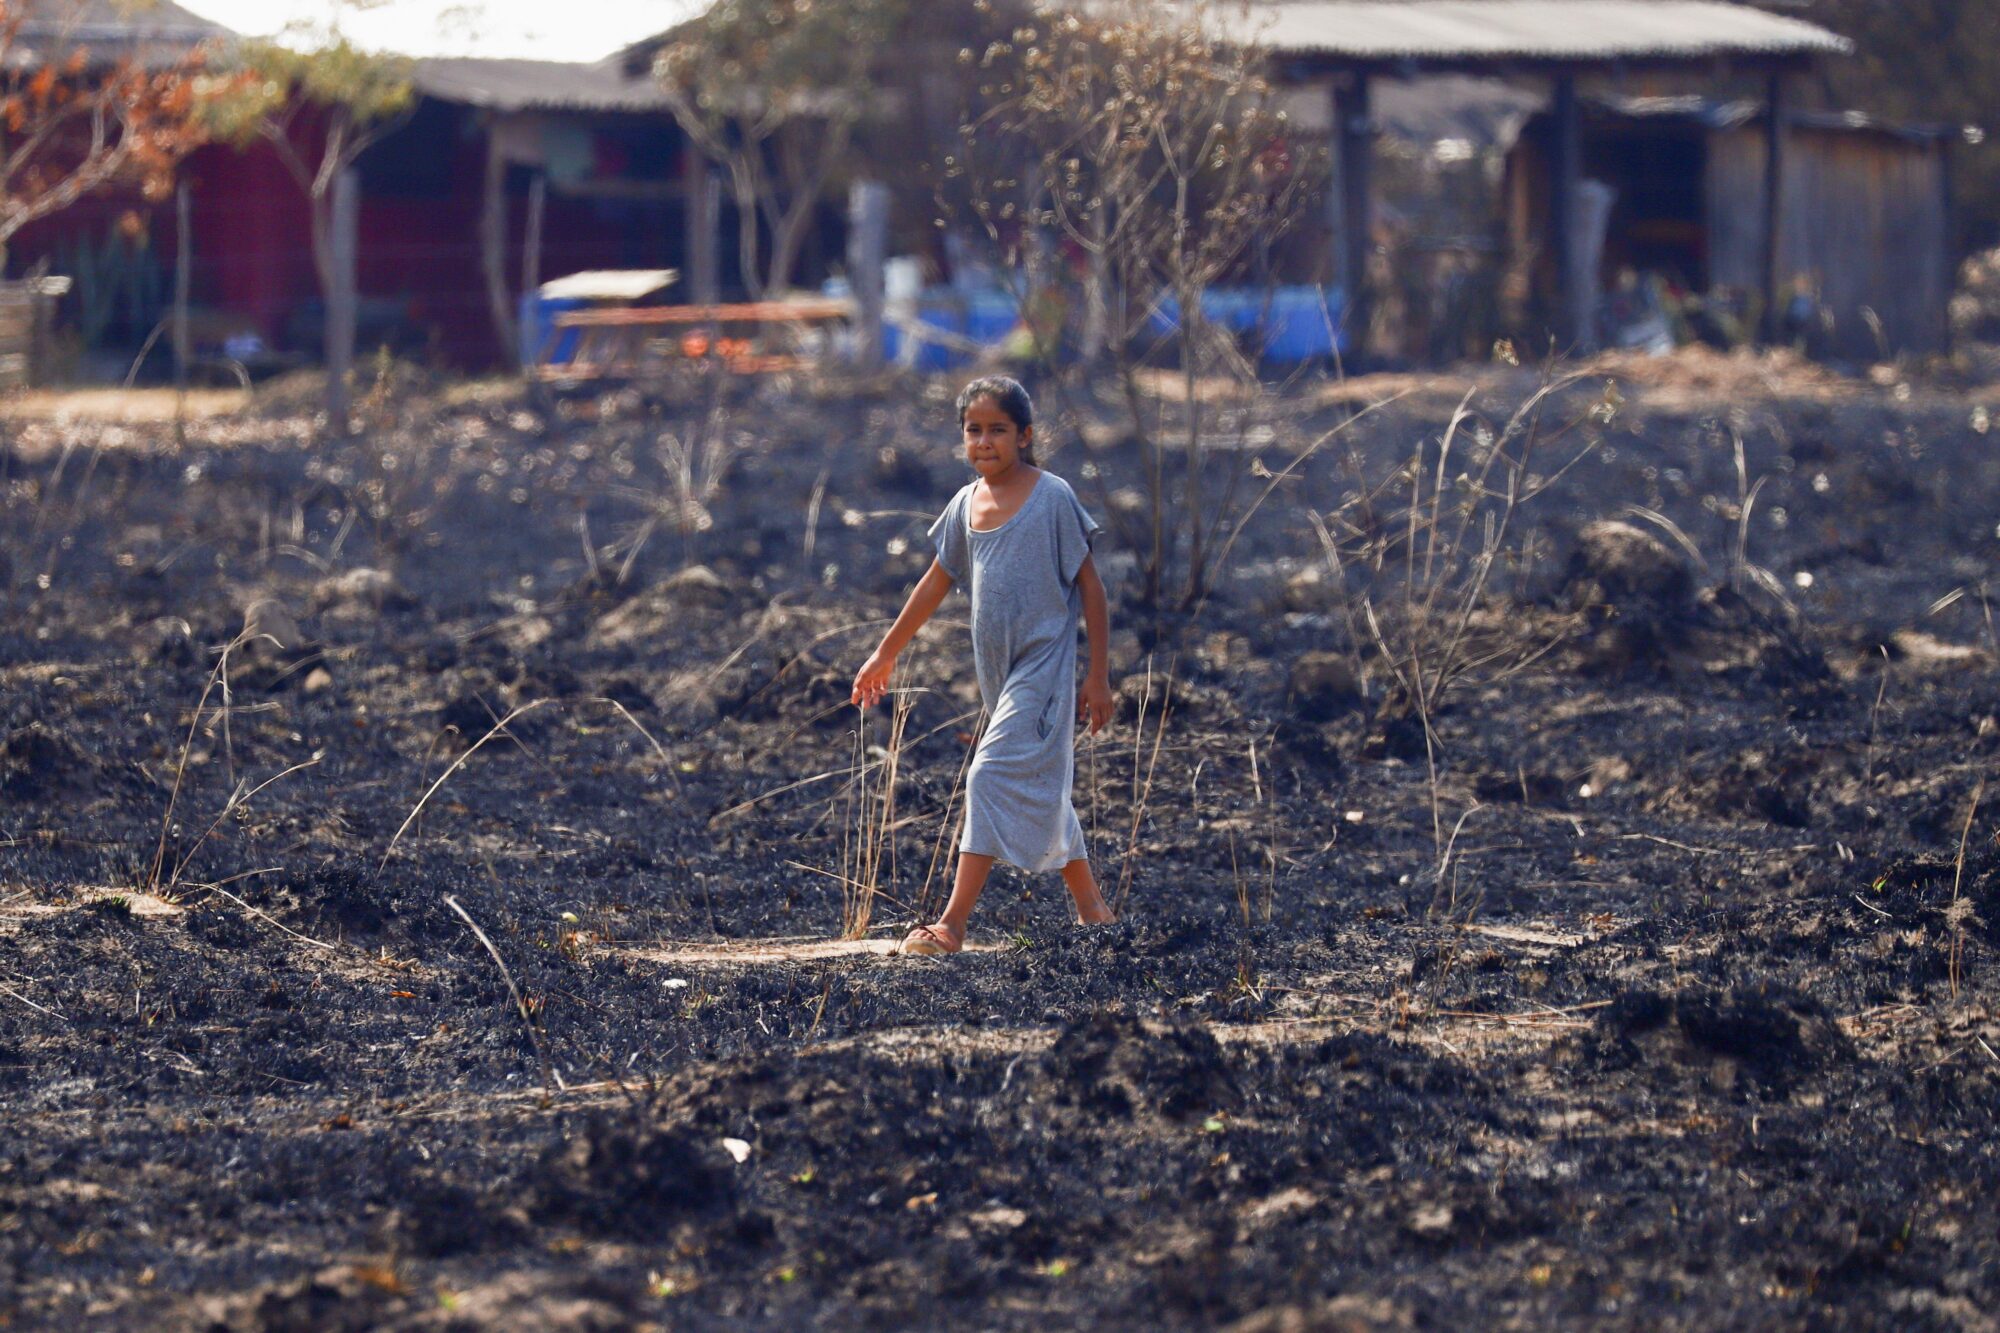 <p>A girl walks through a field burned by wildfires in Corrientes province, Argentina, February 2022. The IPCC&#8217;s latest report on climate change highlights wildfire as an increasing threat to the environment, life and livelihoods across Latin America, with various other extremes and hazards also projected to intensify. (Image: Matias Baglietto / Alamy)</p>